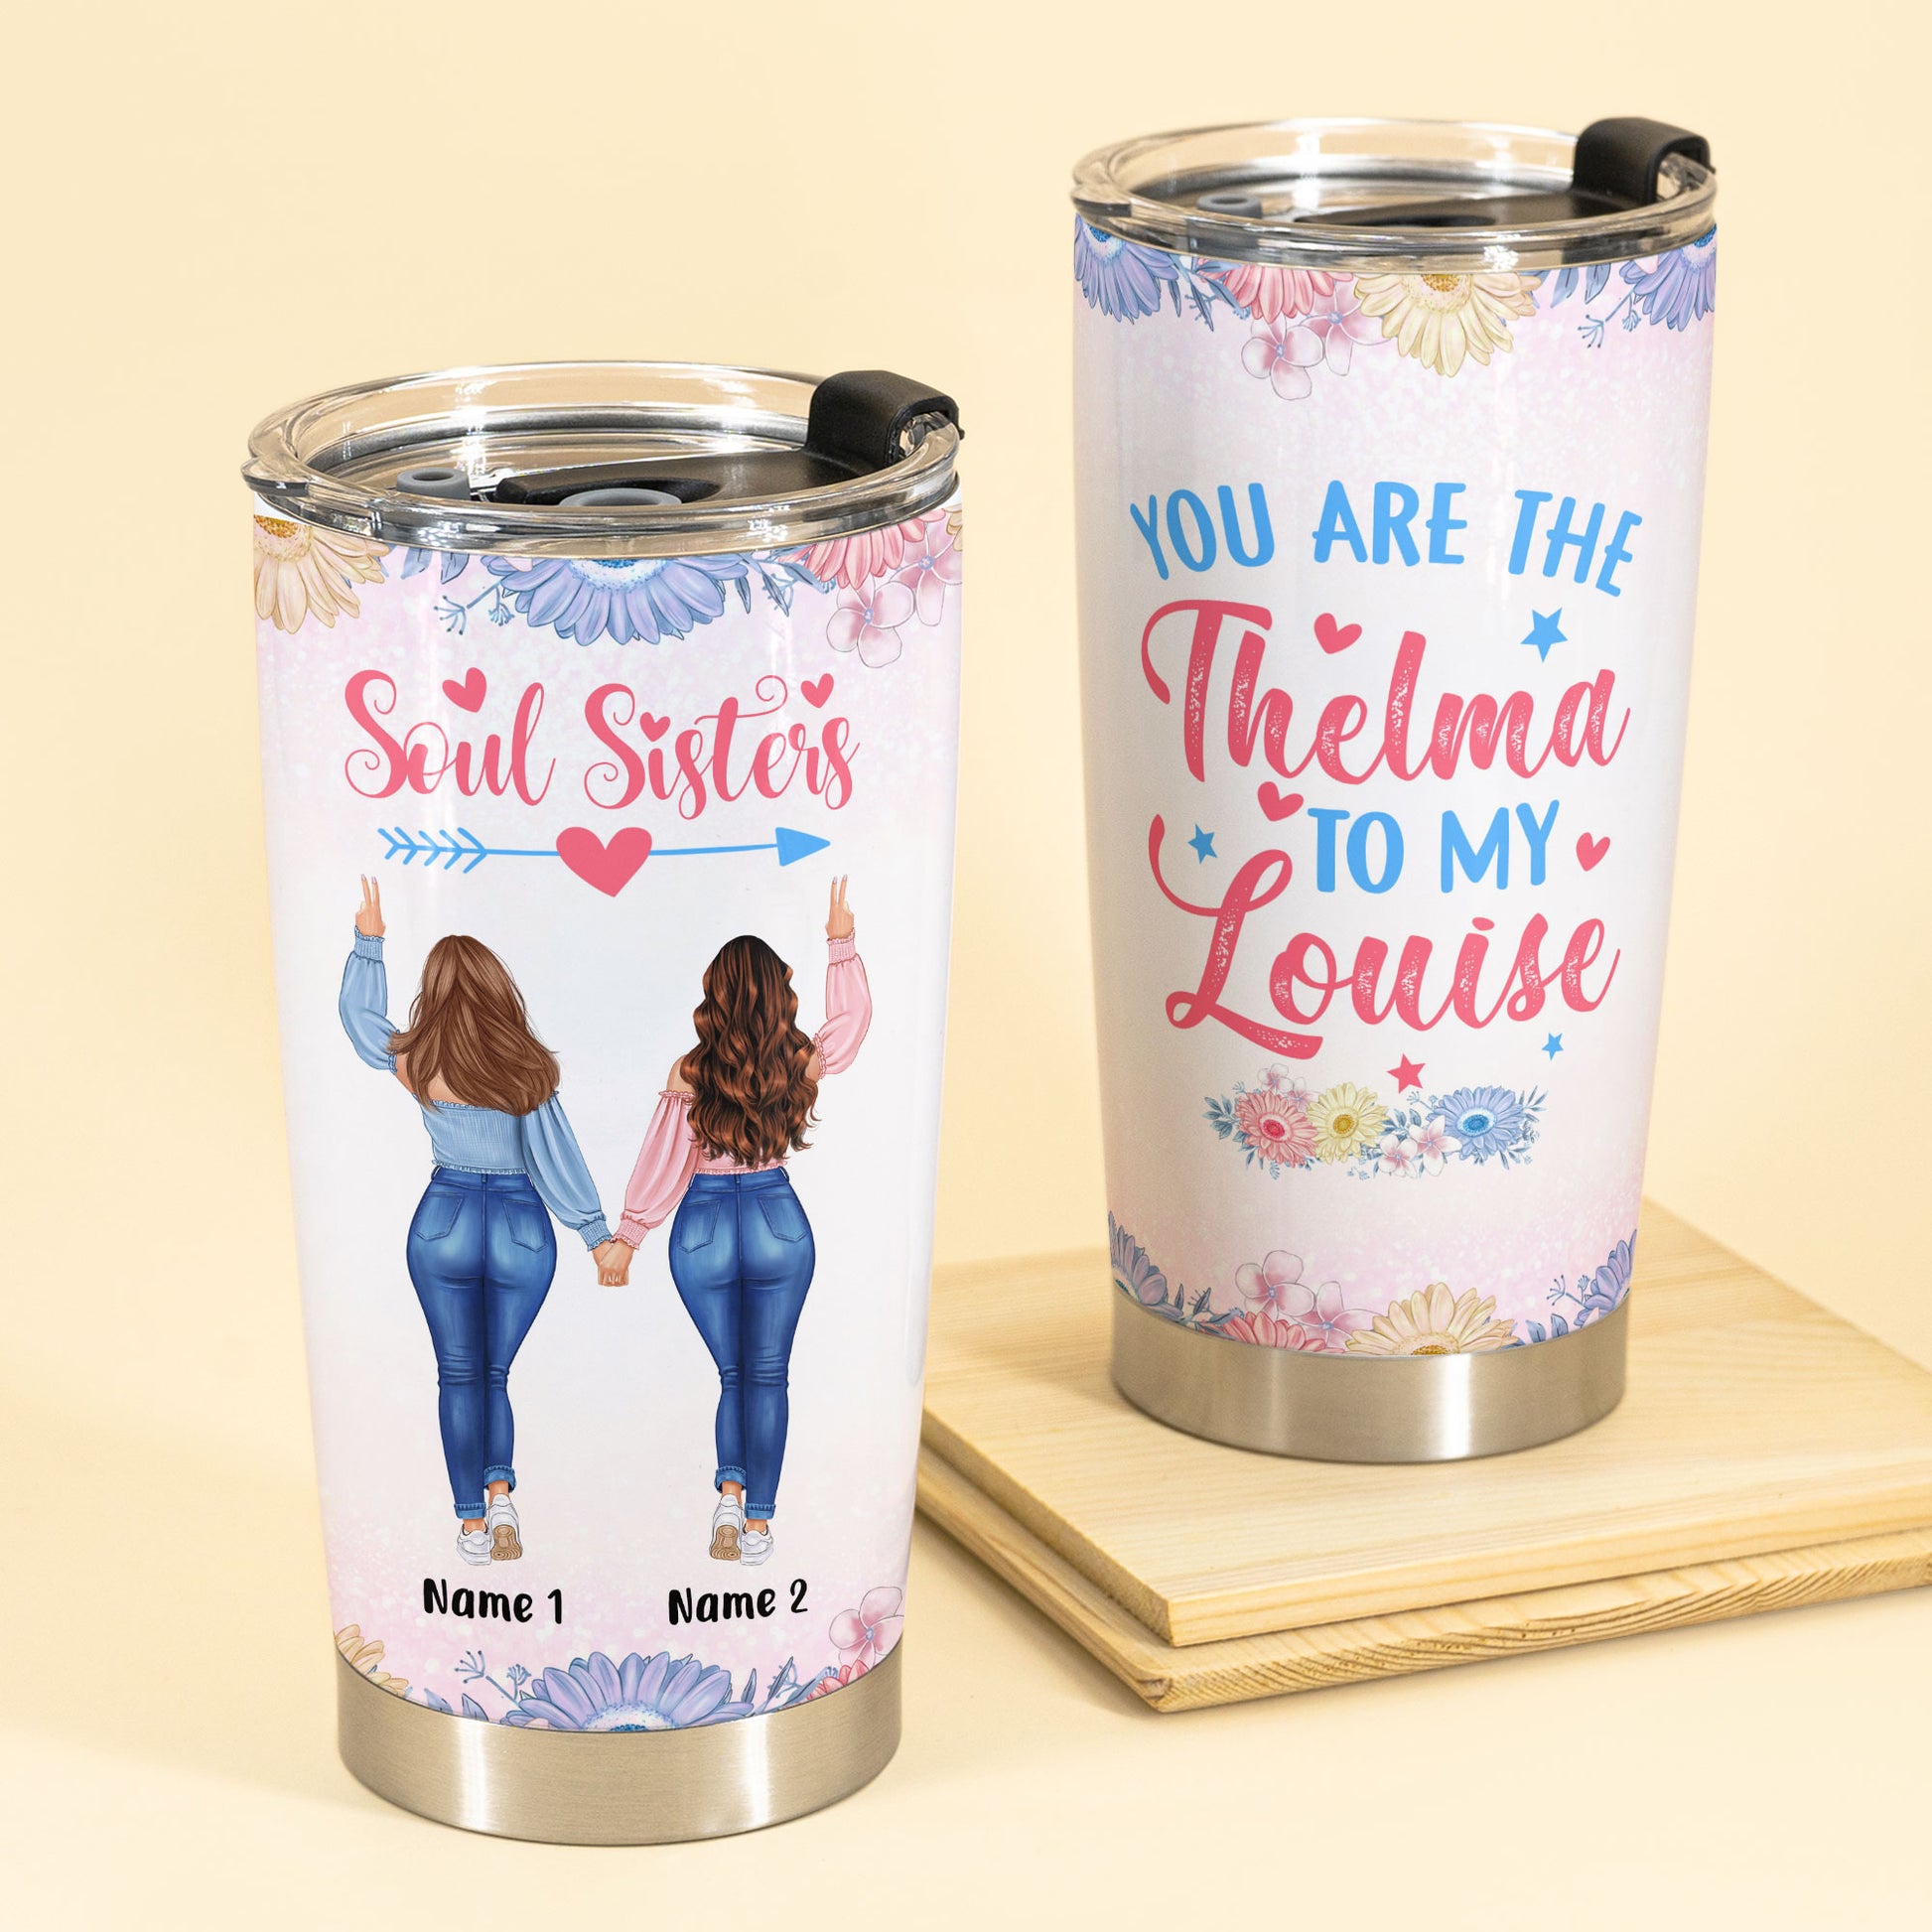 Best Friend Gift Thelma and Louise Gift for Maid of Honor 